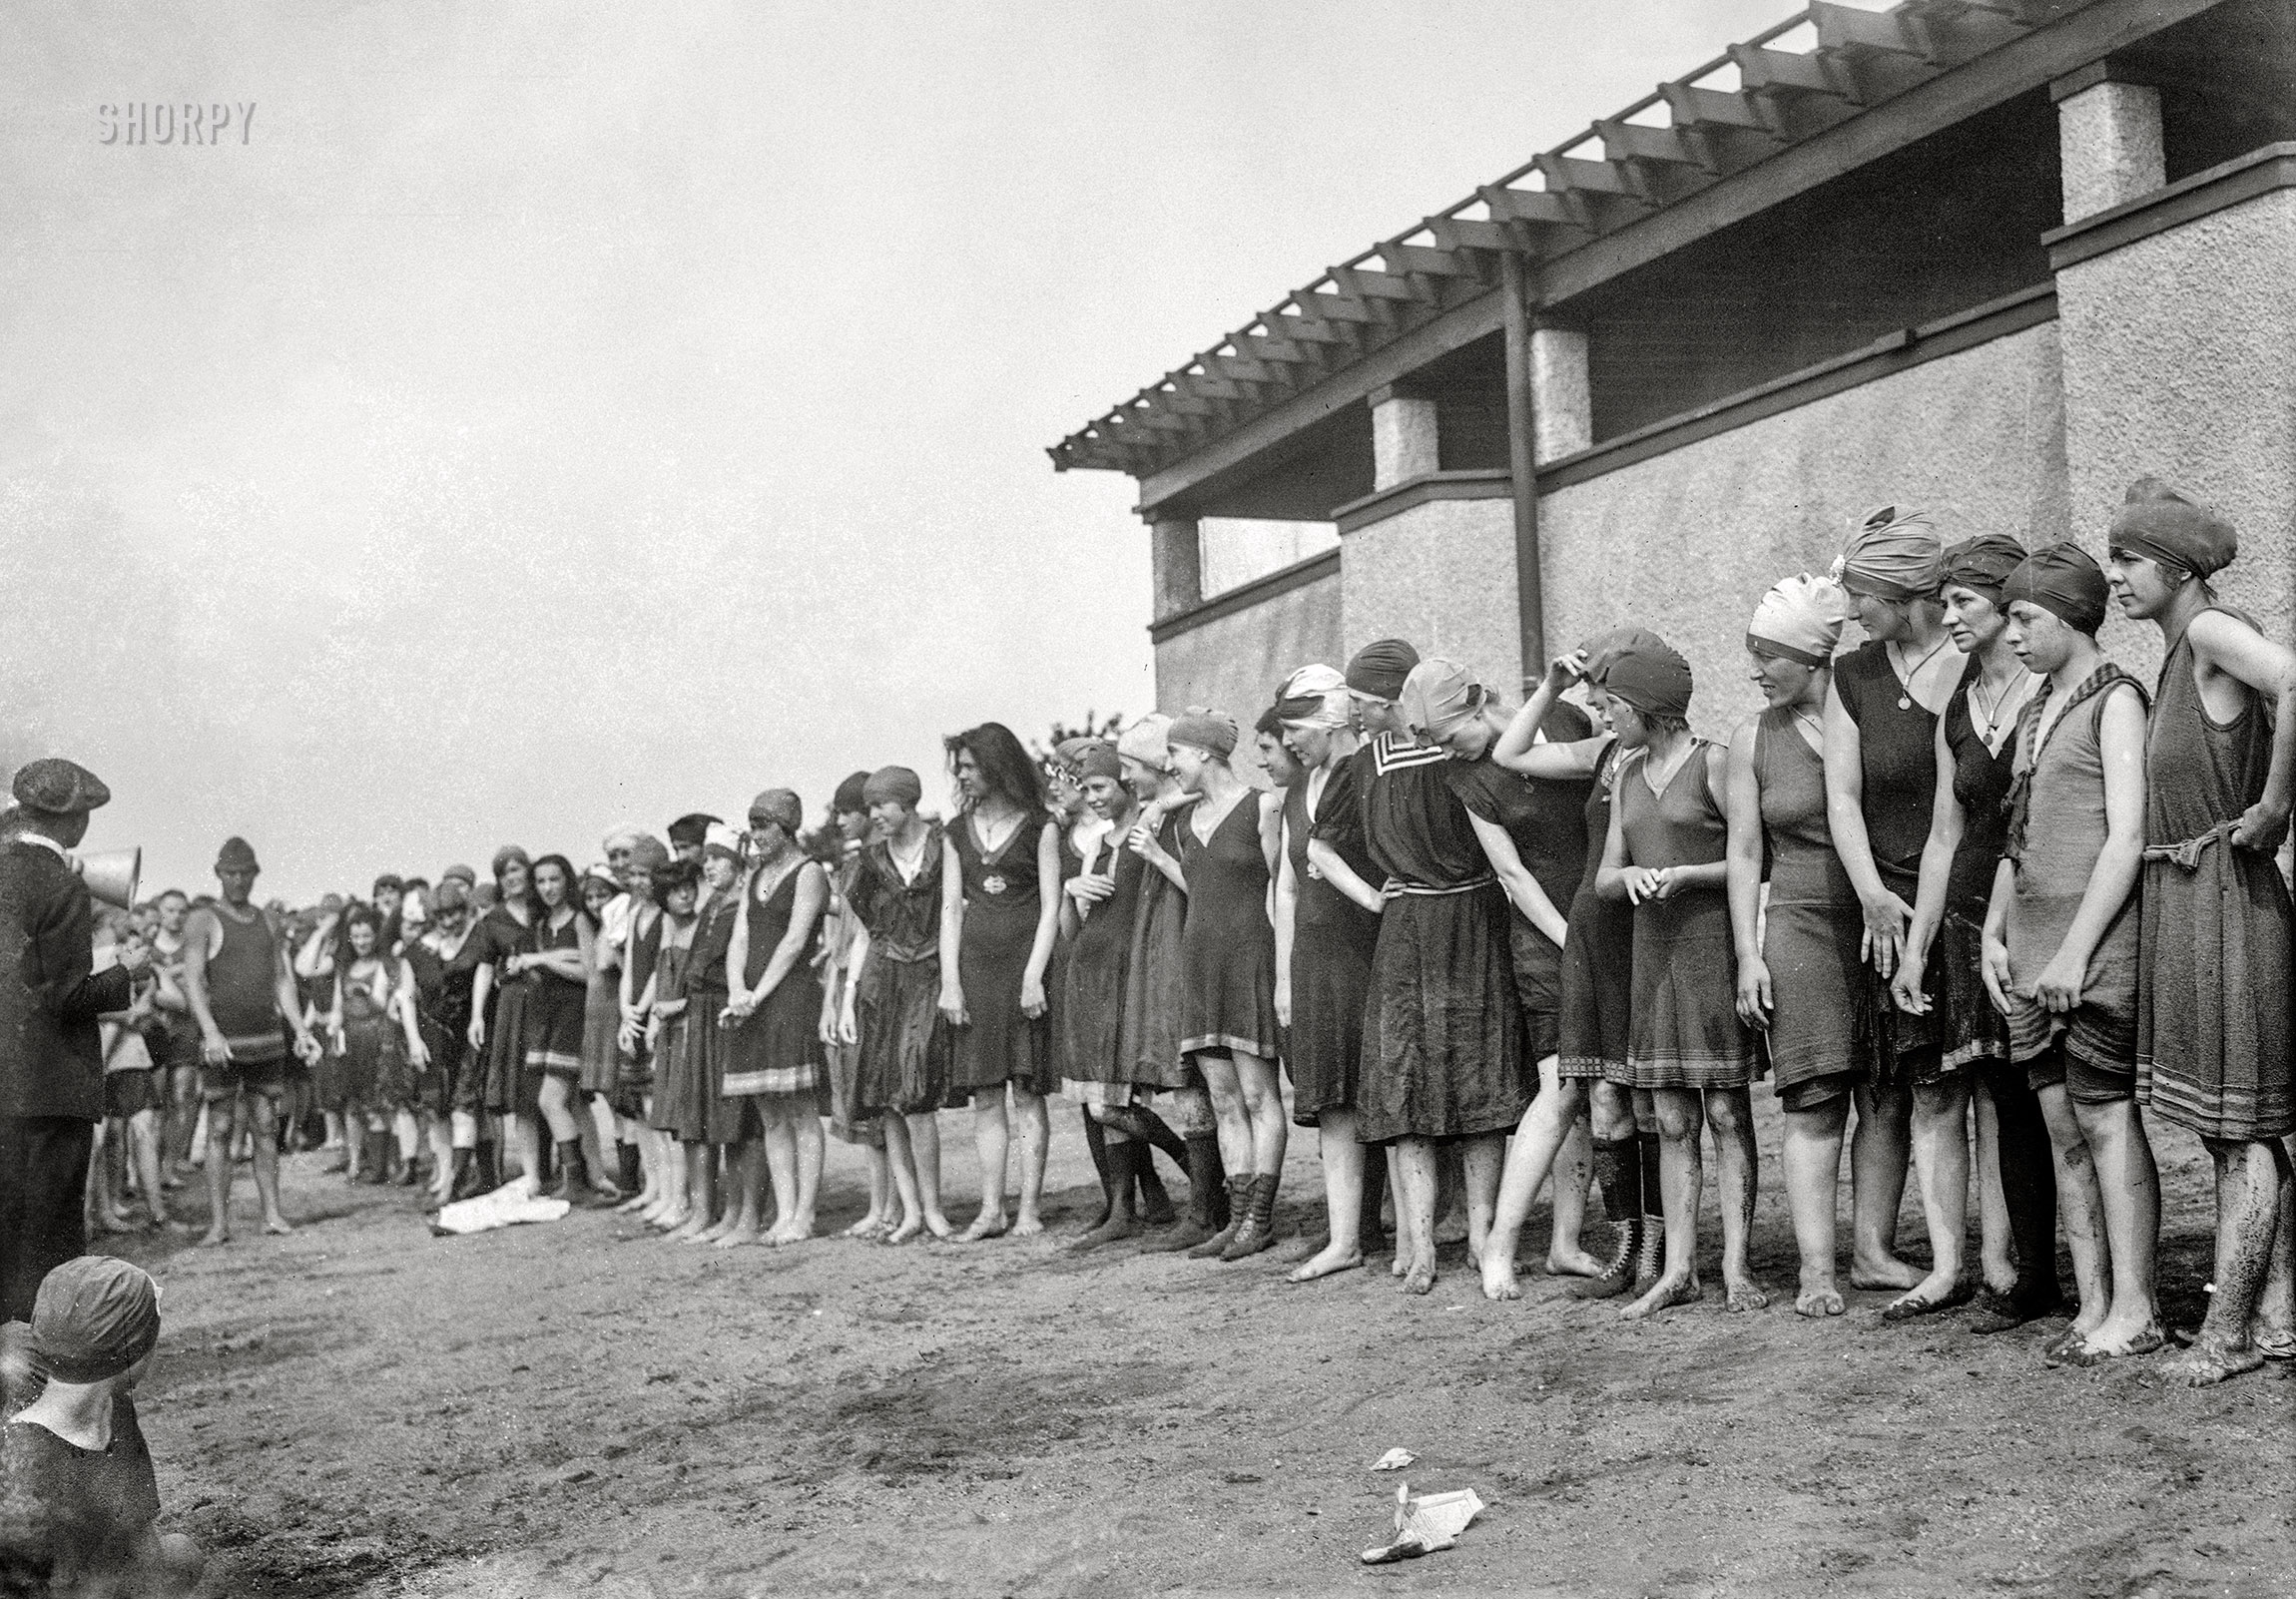 July 13, 1919. Washington, D.C. "Bathing Beauties -- ladies' swimming meet at Tidal Basin bathing beach." 4x6 inch glass negative, National Photo Company Collection. View full size.